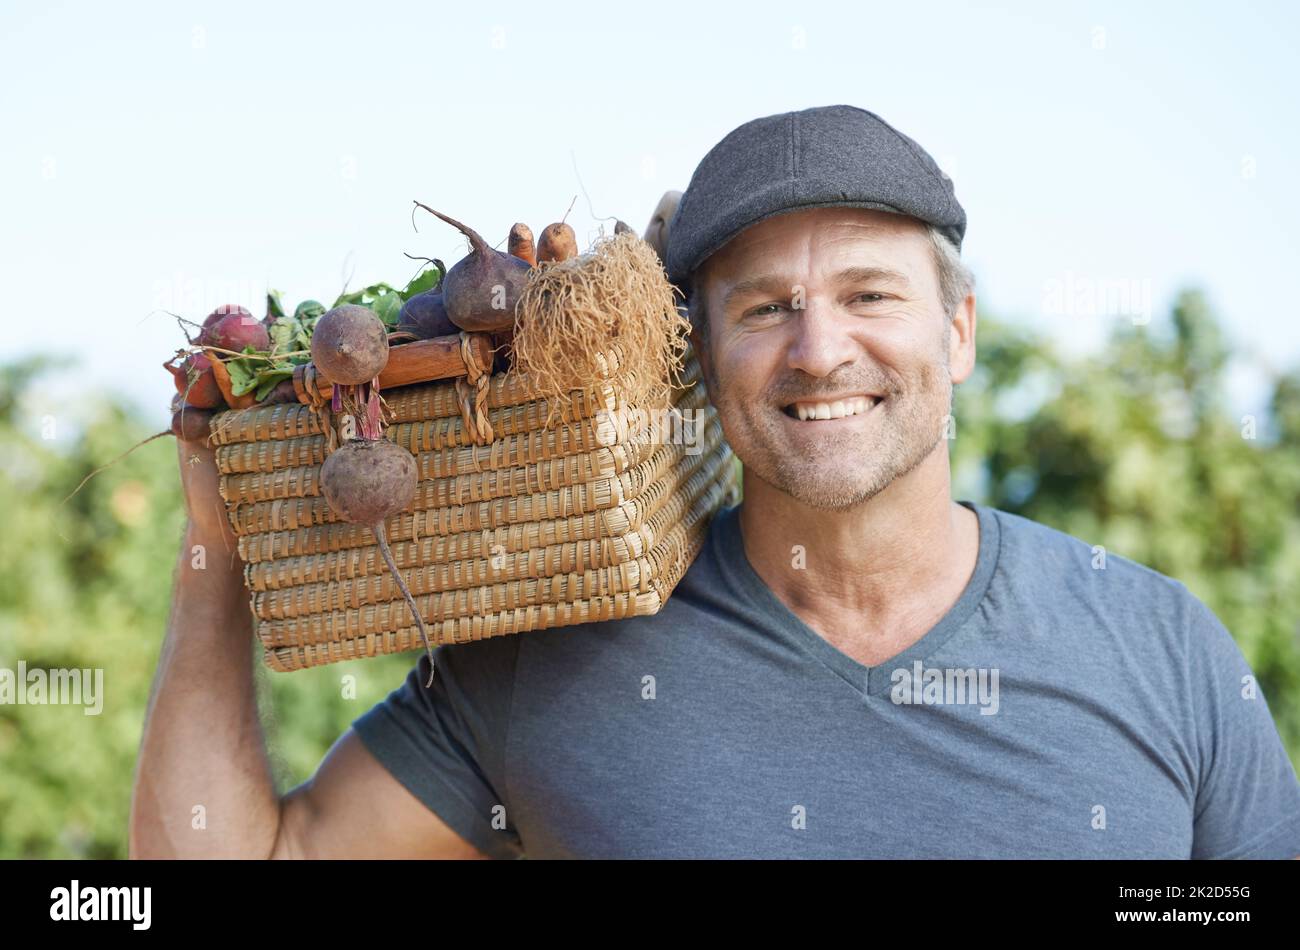 Proud of his produce. A smiling mature farmer holding a basket of fresh produce. Stock Photo